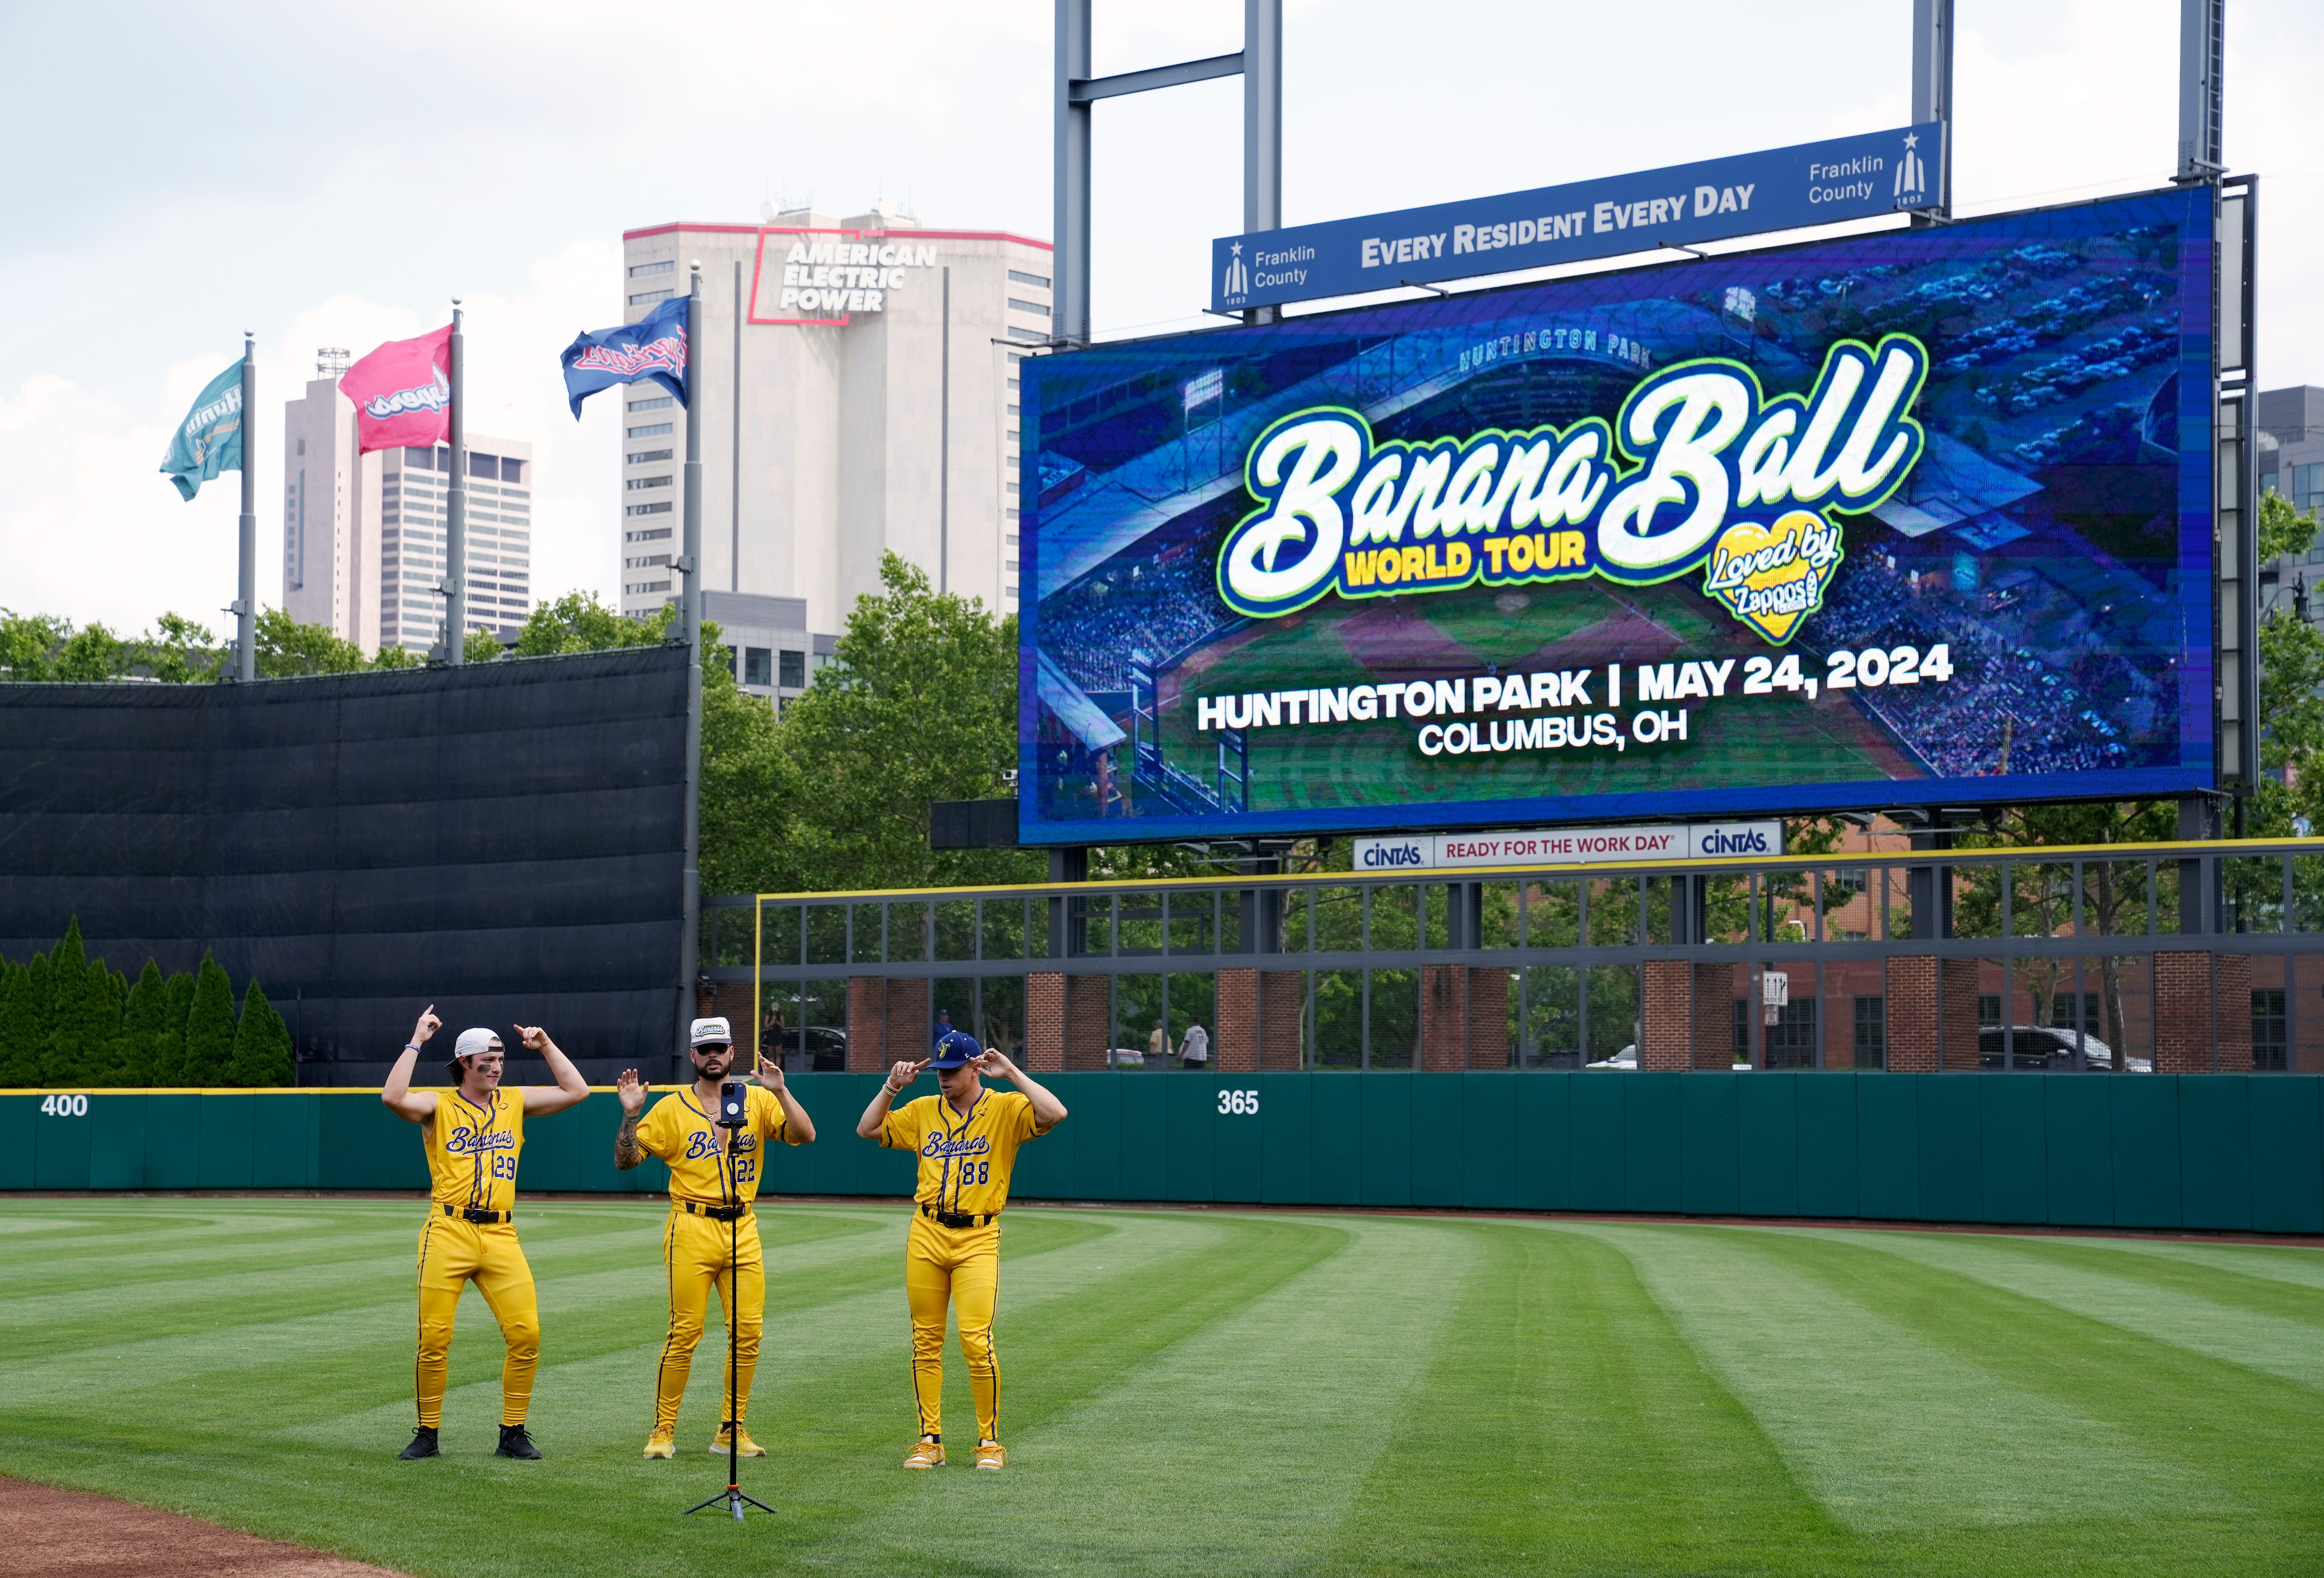 Savannah Bananas add some Ohio State flair in Columbus debut, selling out Huntington Park